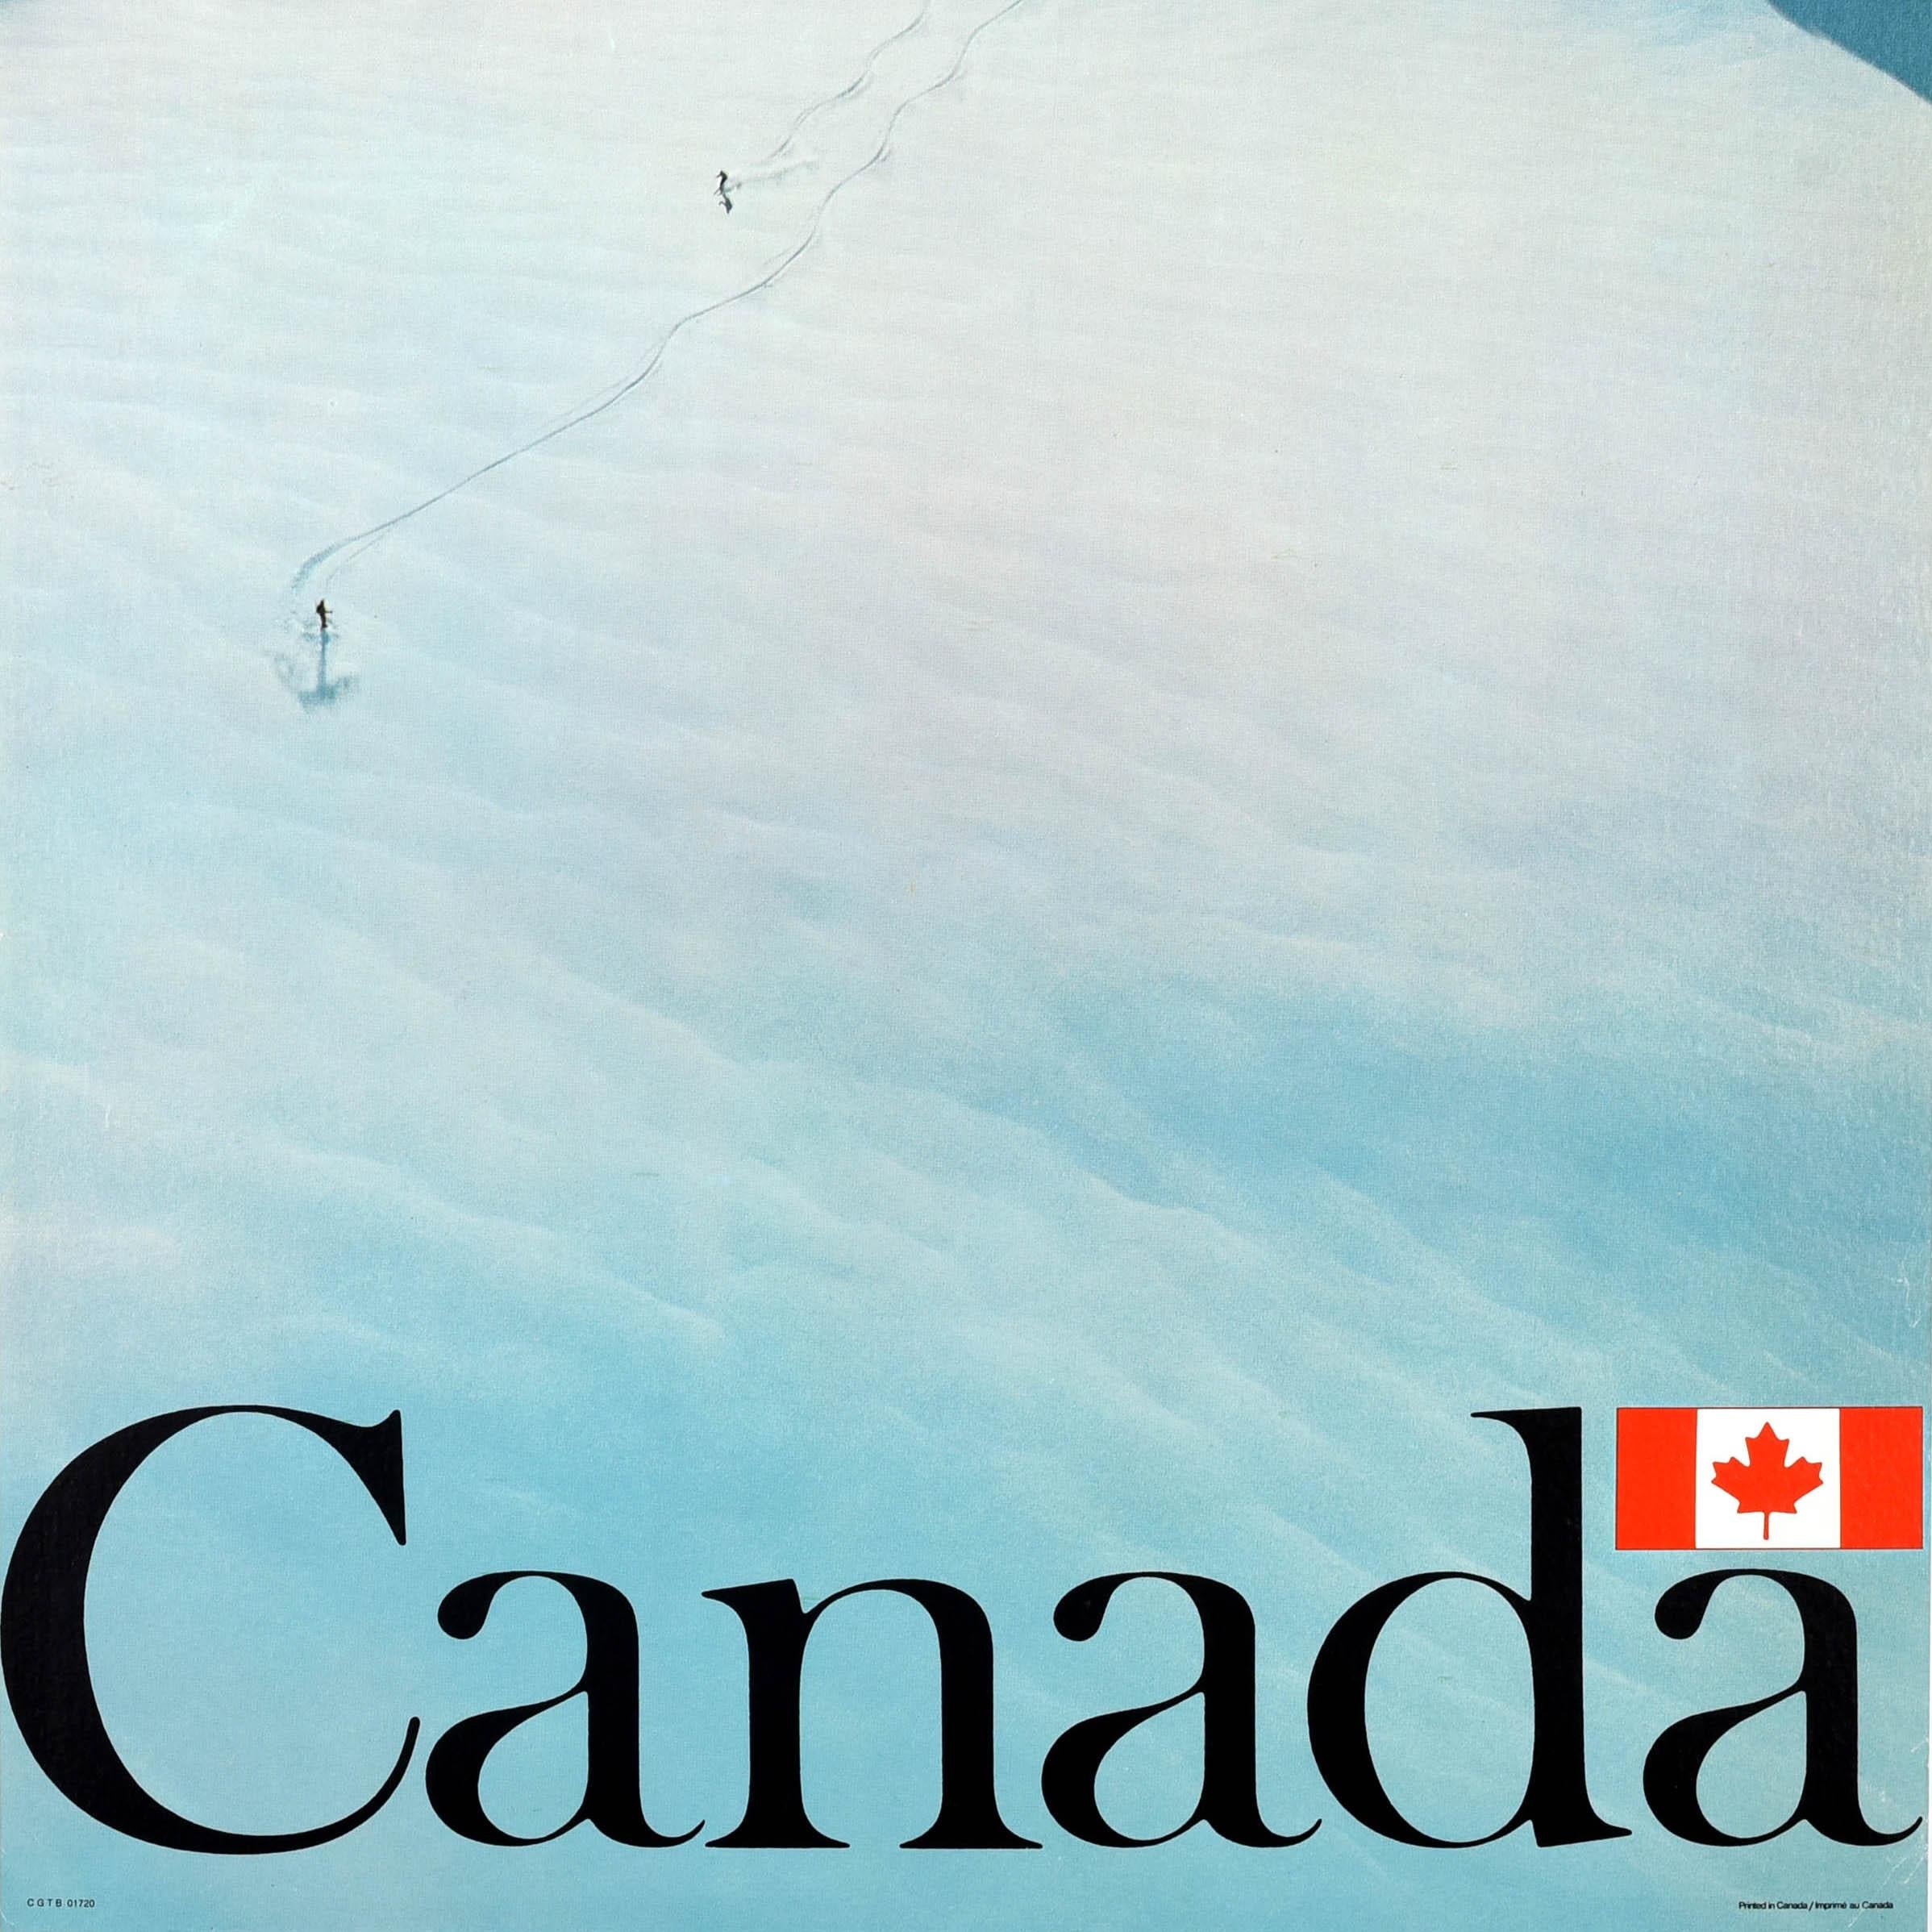 Original Vintage Travel Poster Canada Ski Slope Winter Sports Mountain Skiing - Print by Unknown